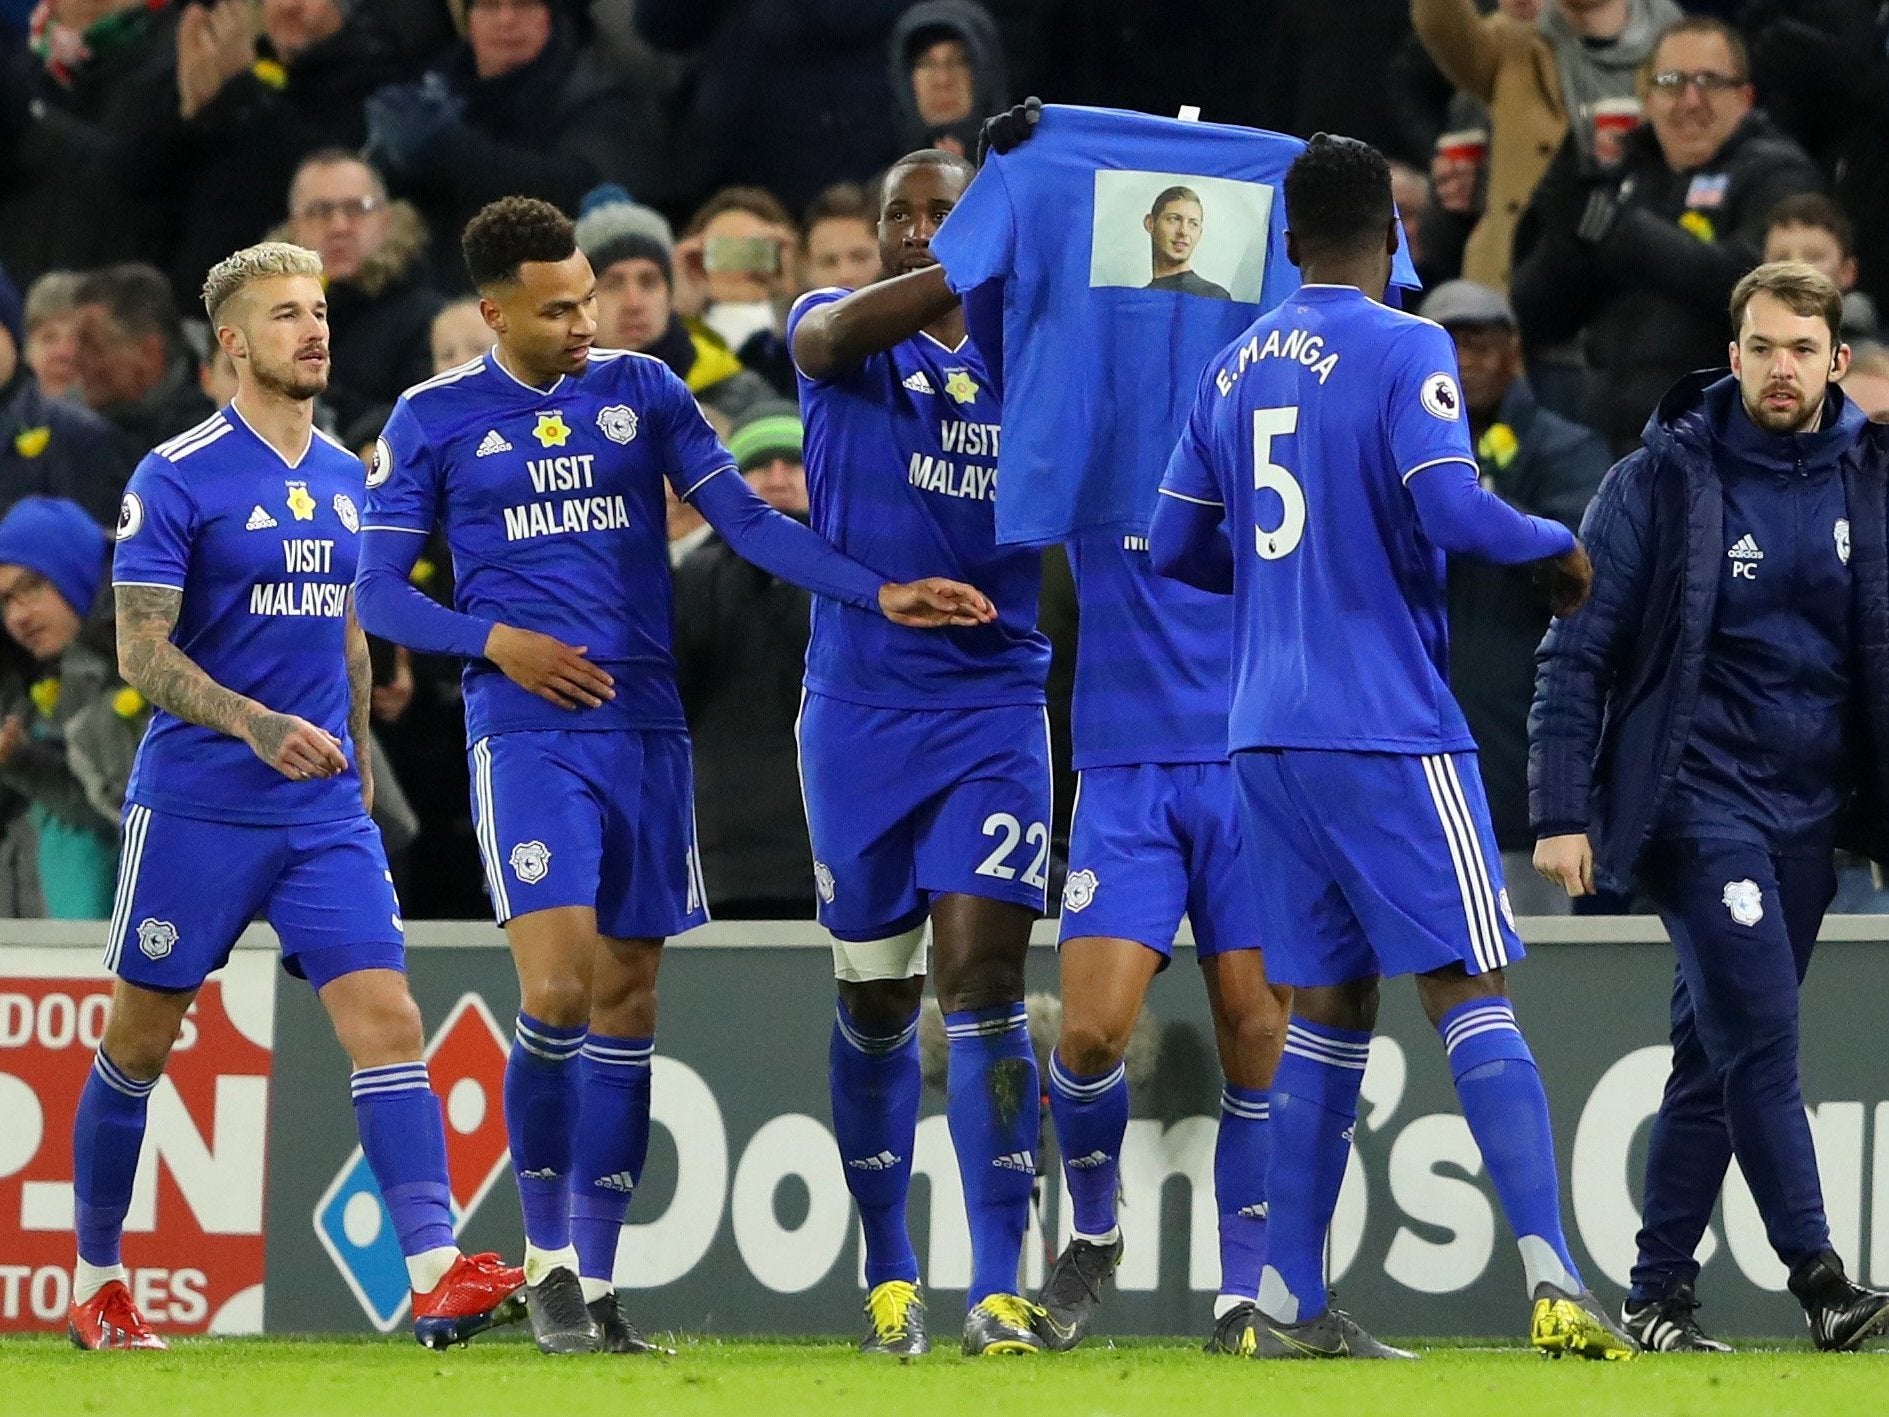 Cardiff’s players lifted a t-shirt in honour of Emiliano Sala after the first goal